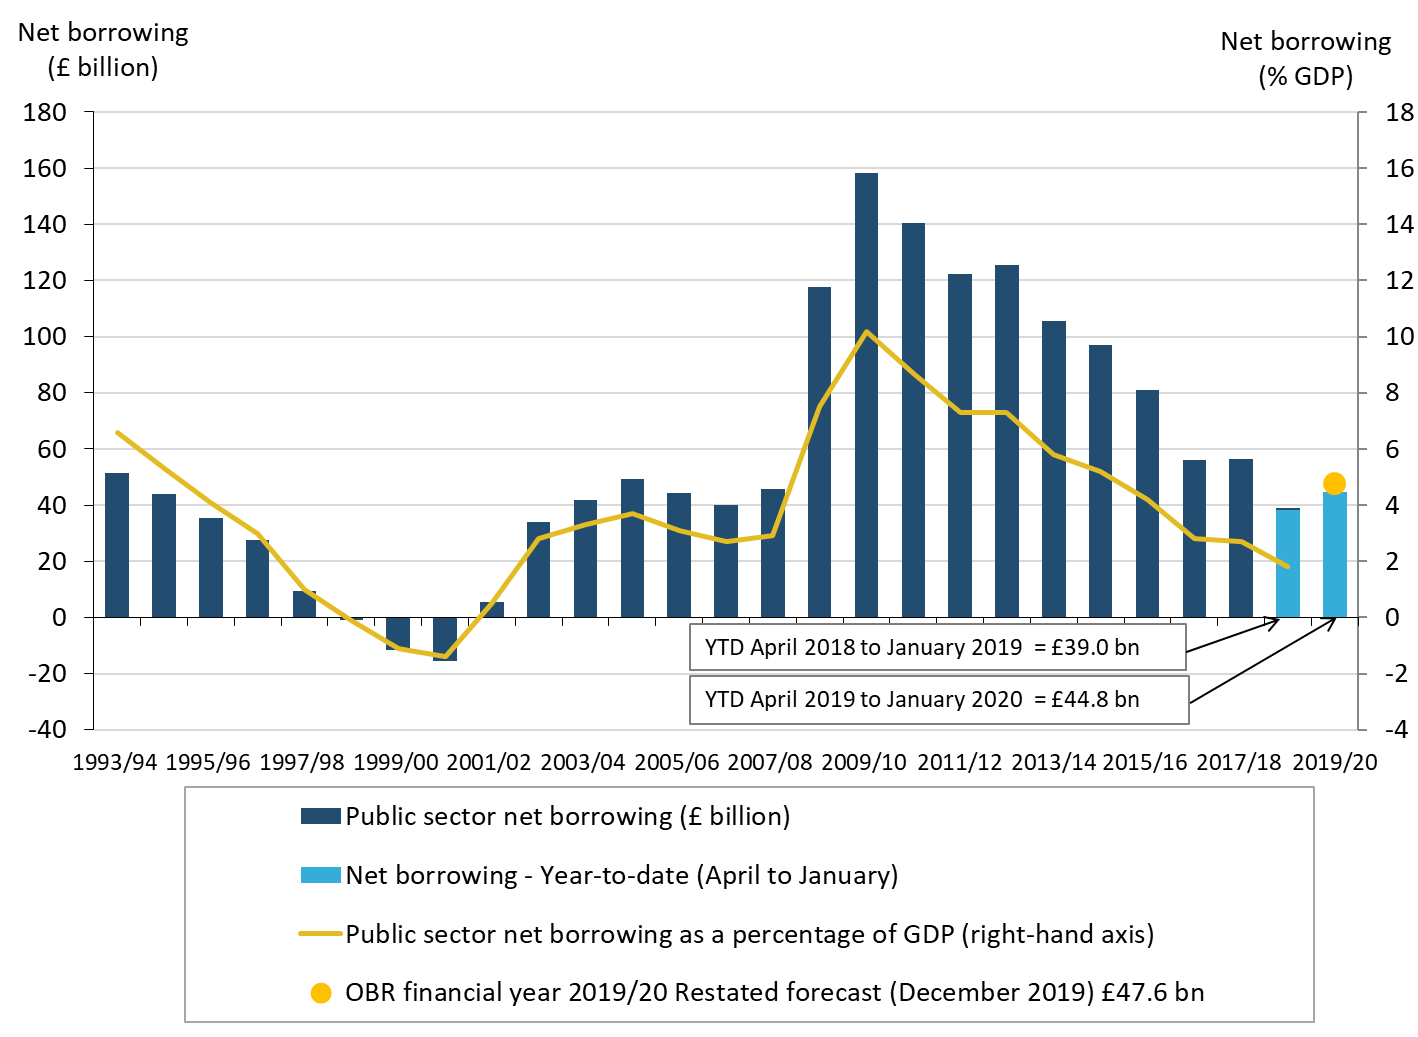 In the financial year ending March 2020, the Office for Budget Responsibility forecast borrowing to be £47.6 billion, OBR restated forecast December 2019.